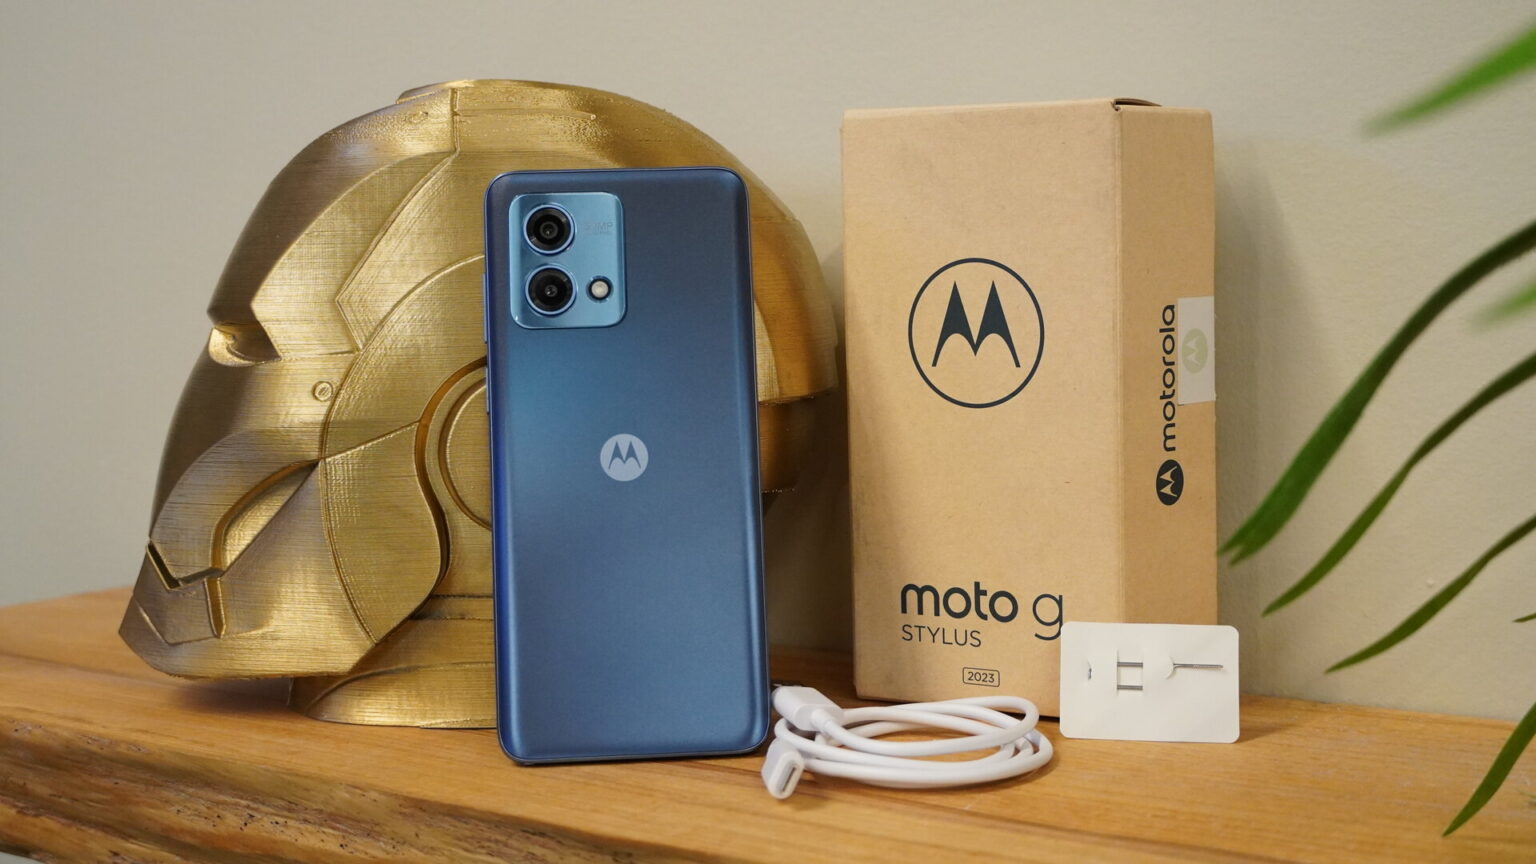 Does the Moto G Stylus have wireless charging? Android Authority